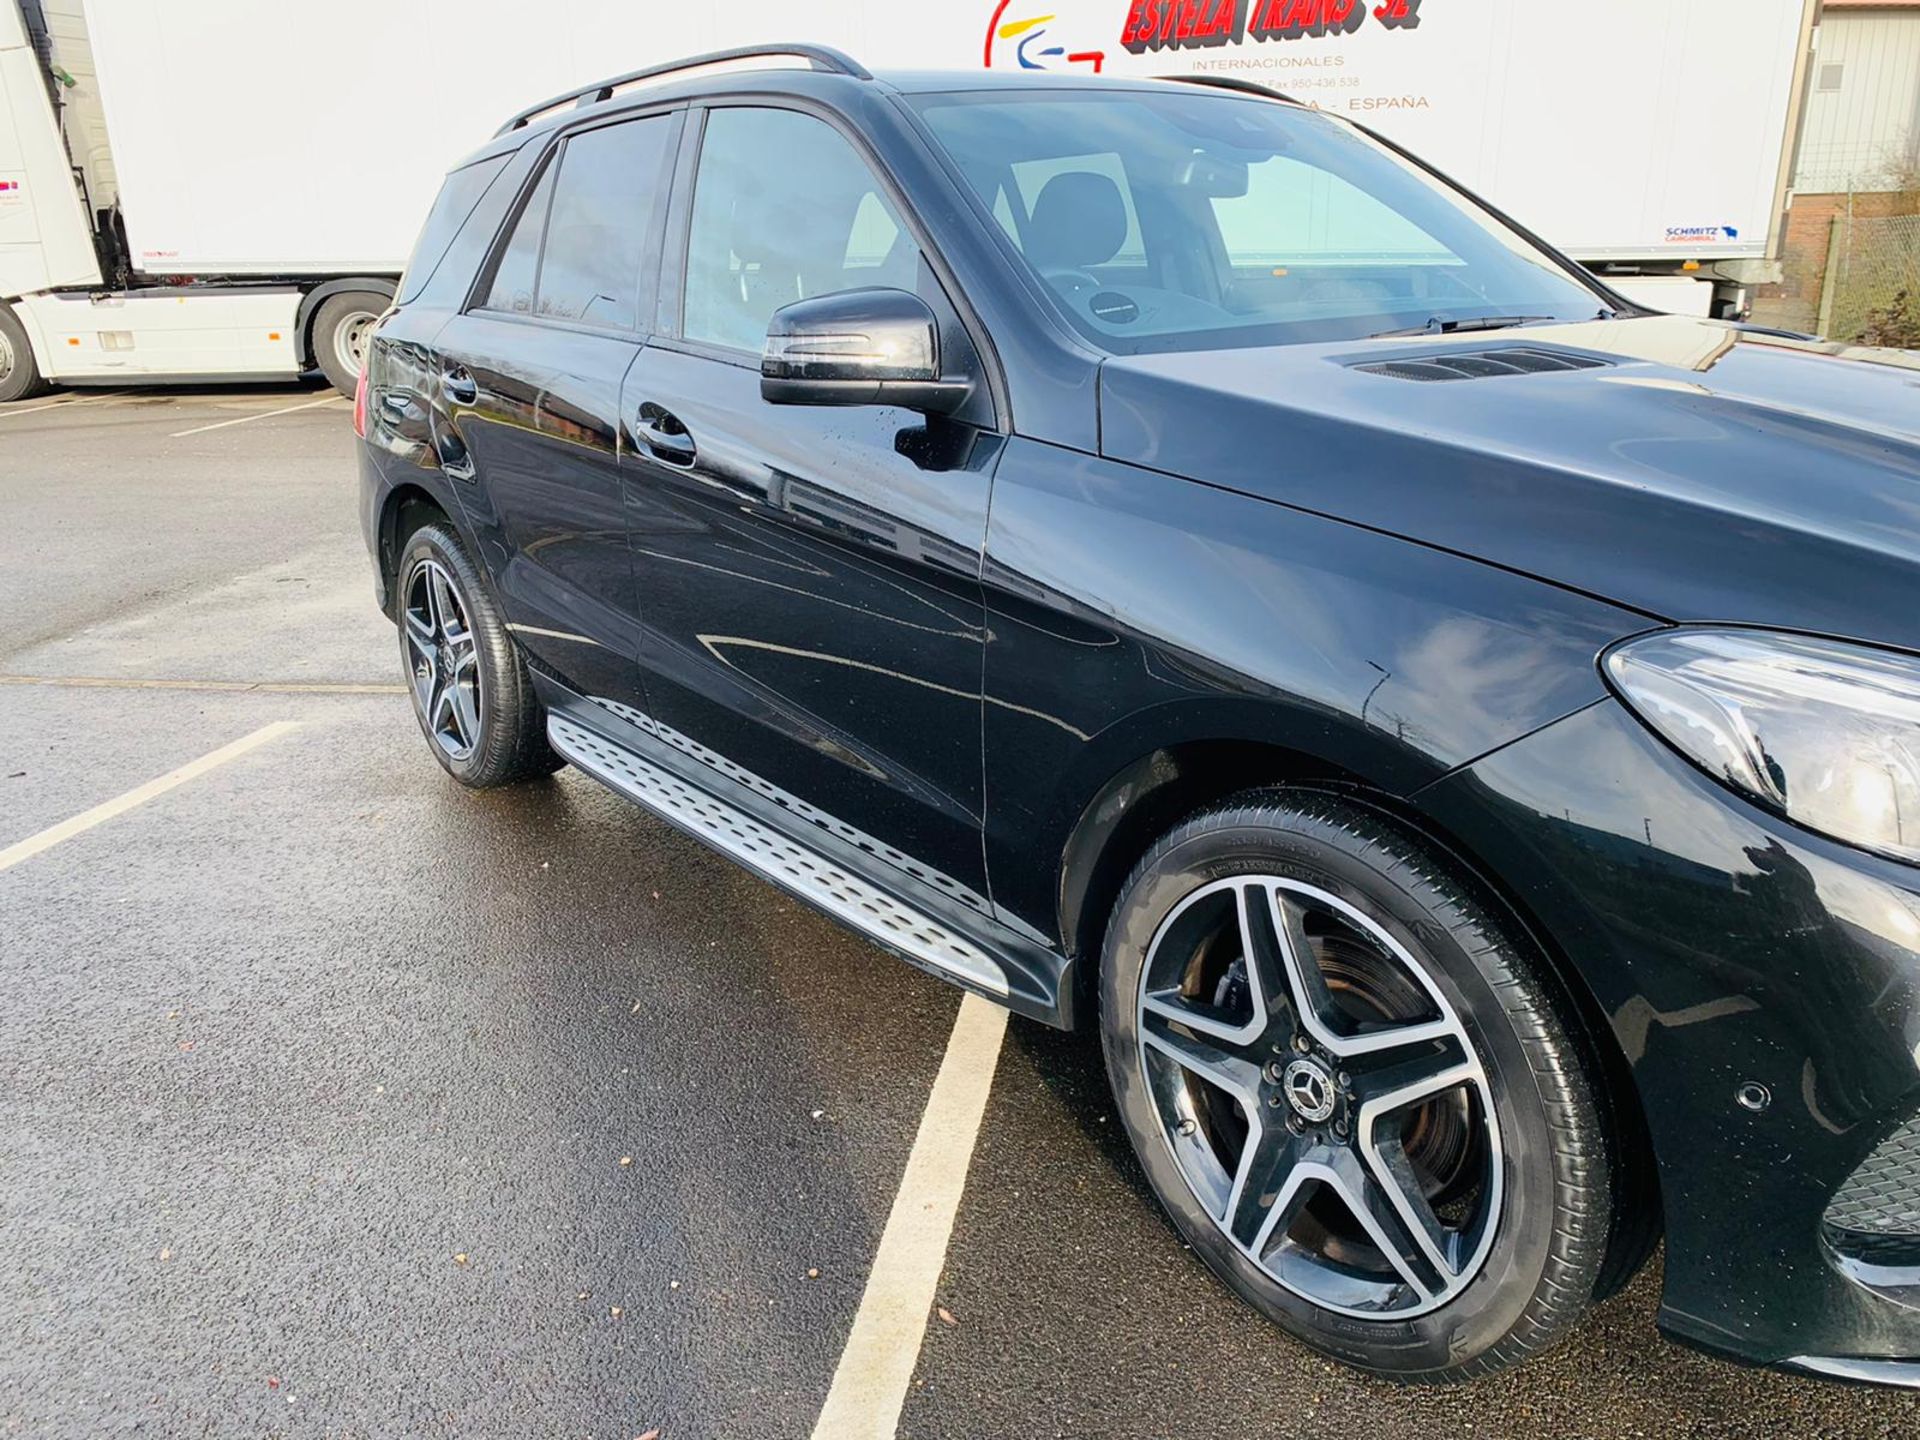 Mercedes GLE 250d 4Matic AMG Night Edition 9G Tronic - 2018 18 Reg - Only 31K Miles - BIG SPEC - Image 5 of 37